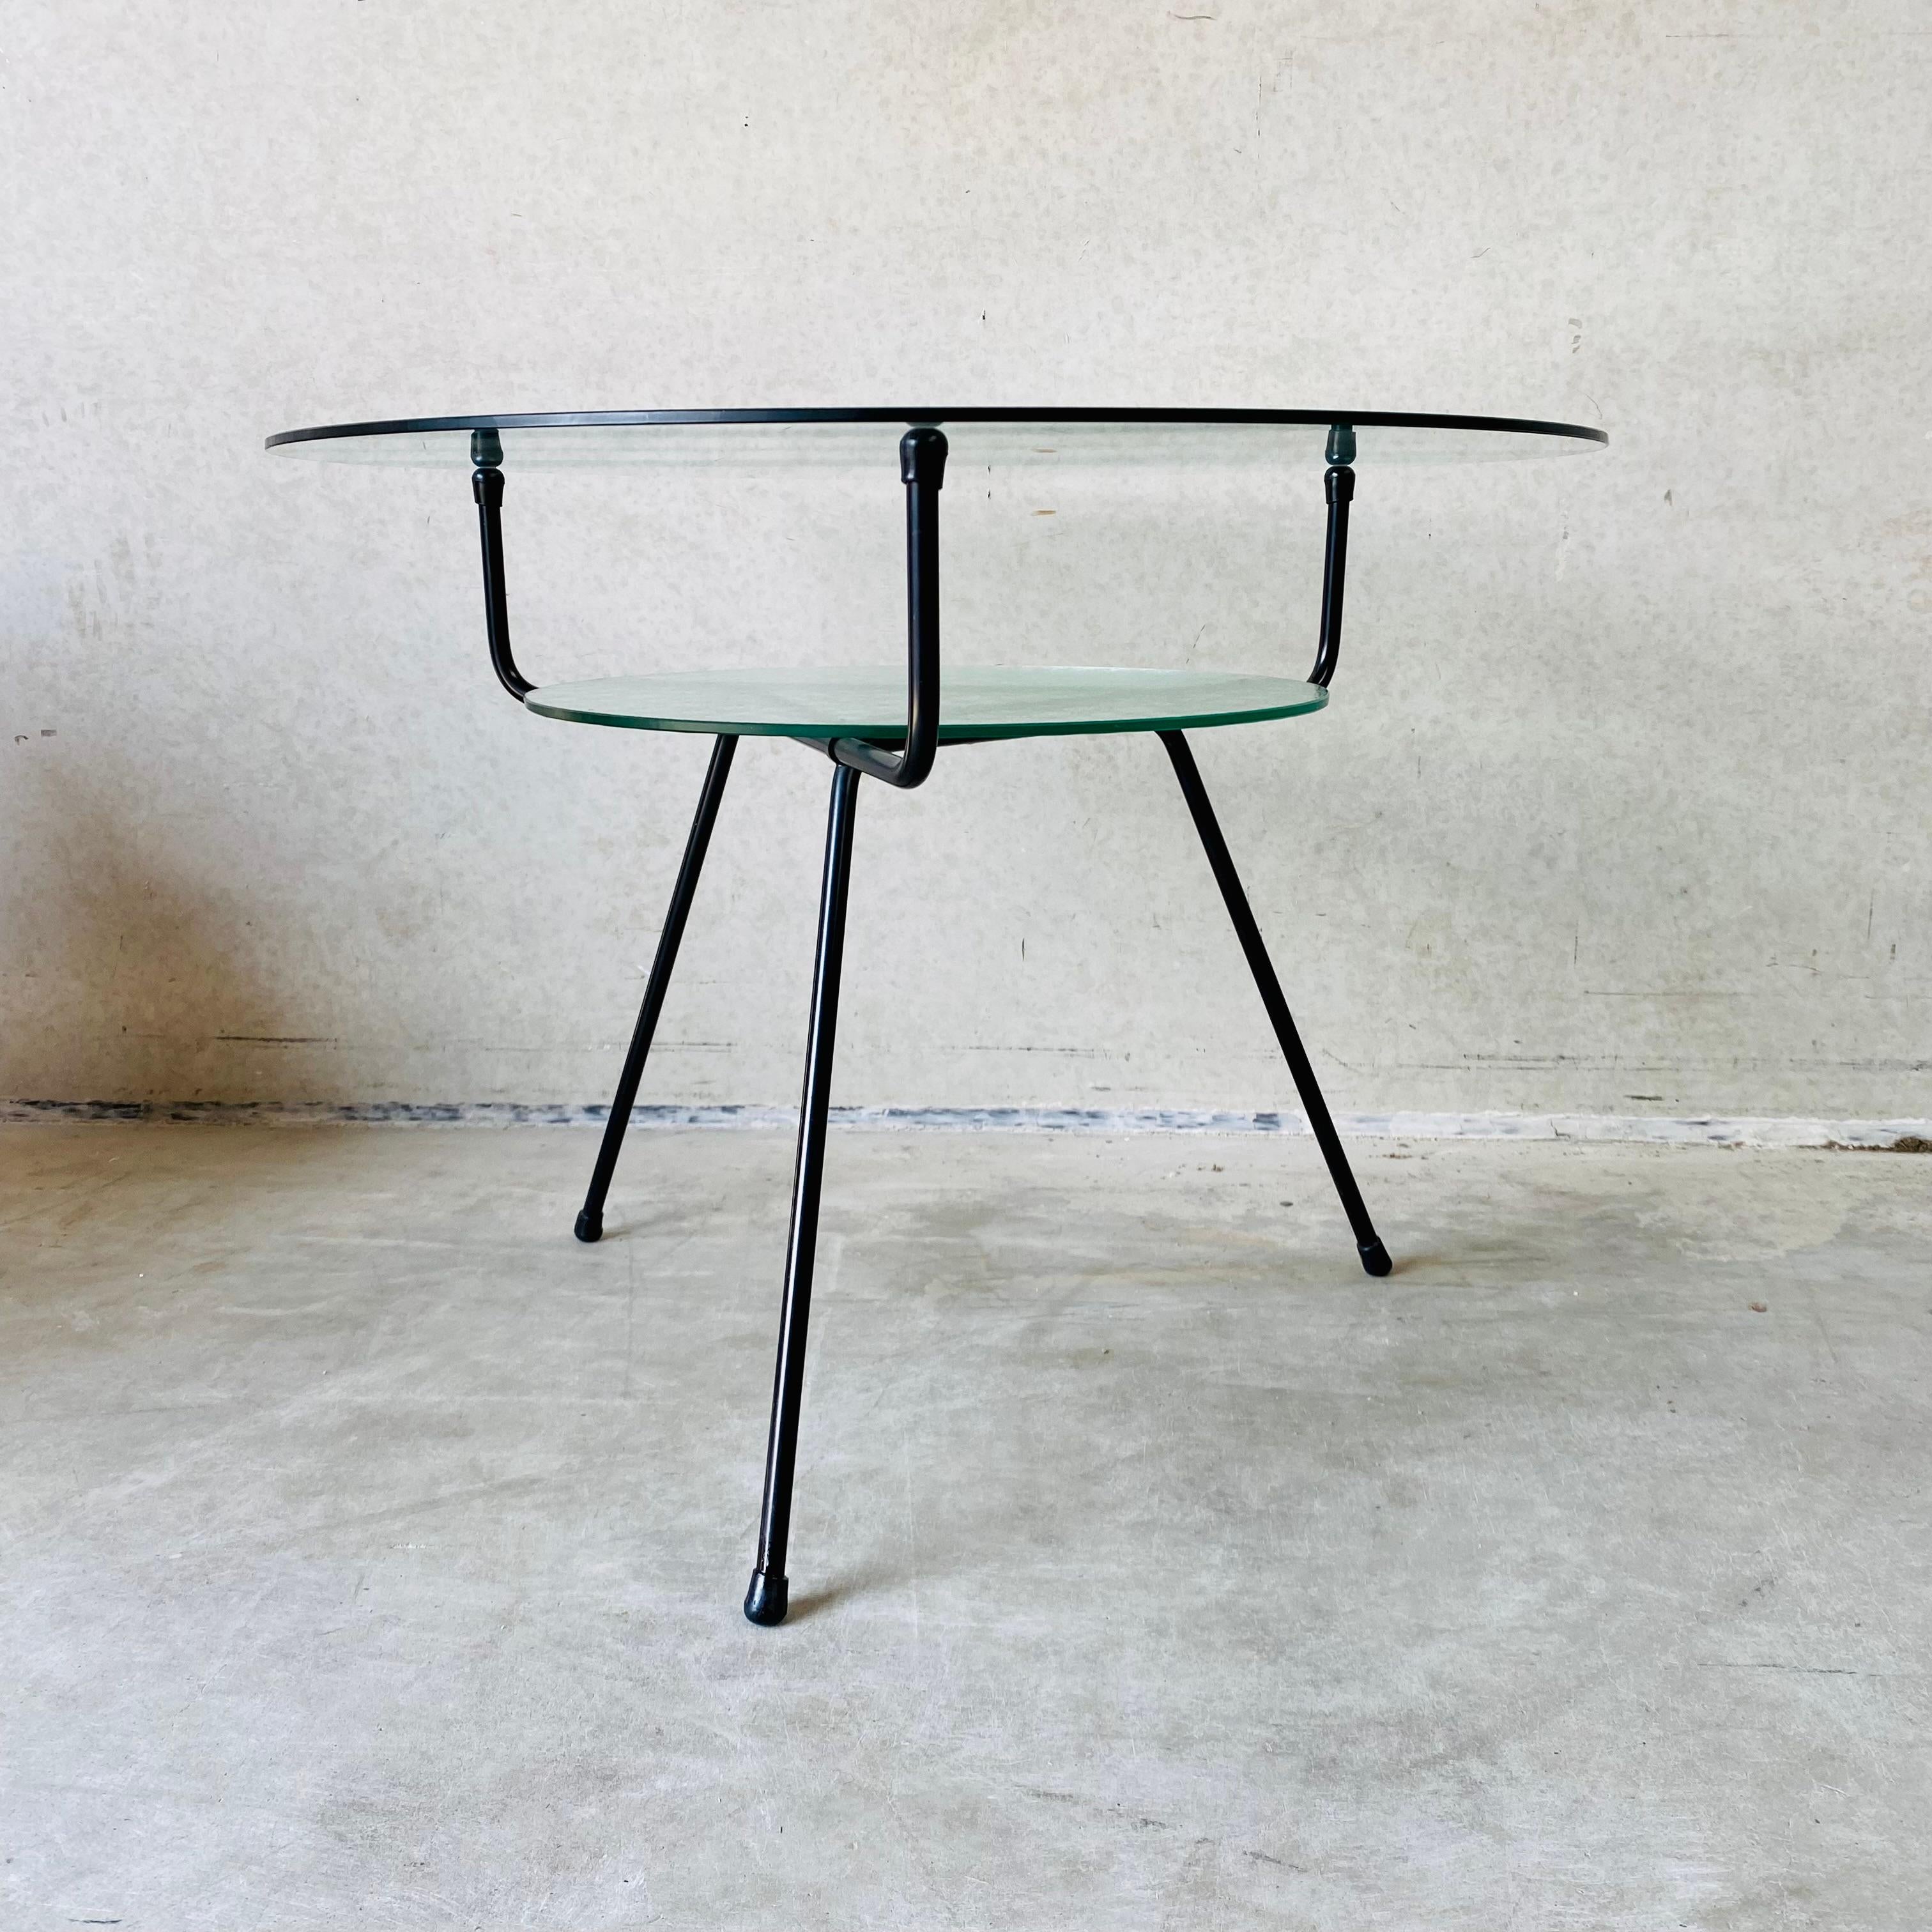 Metal Mid-century Glass Coffee Table By W.H. Gispen For KEMBO, Dutch Design 1950 For Sale